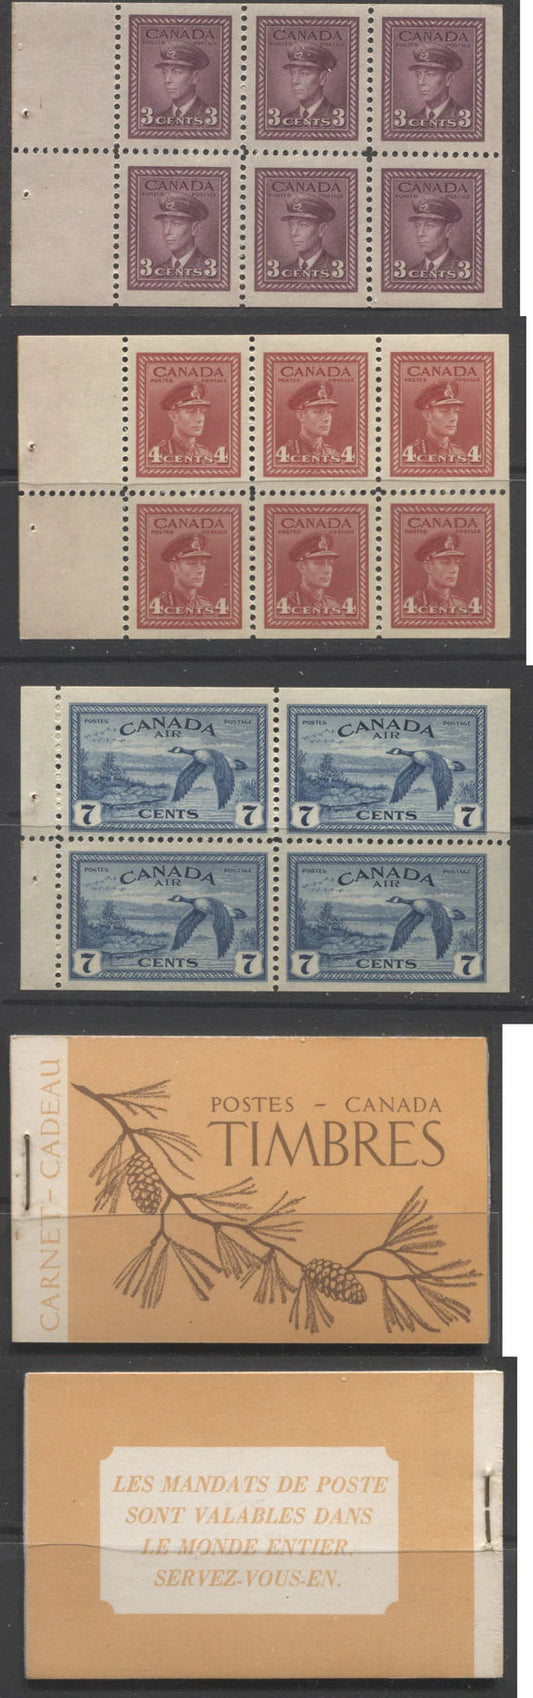 Lot 299 Canada #BK39a (McCann #39c) 1942-1949 War Issue Complete $1.00 French, Booklet Containing 1 Pane Each of 6 of 3c and 4c Plus 2 Panes of 4 7c Airmail Stamps, 12 mm Staple